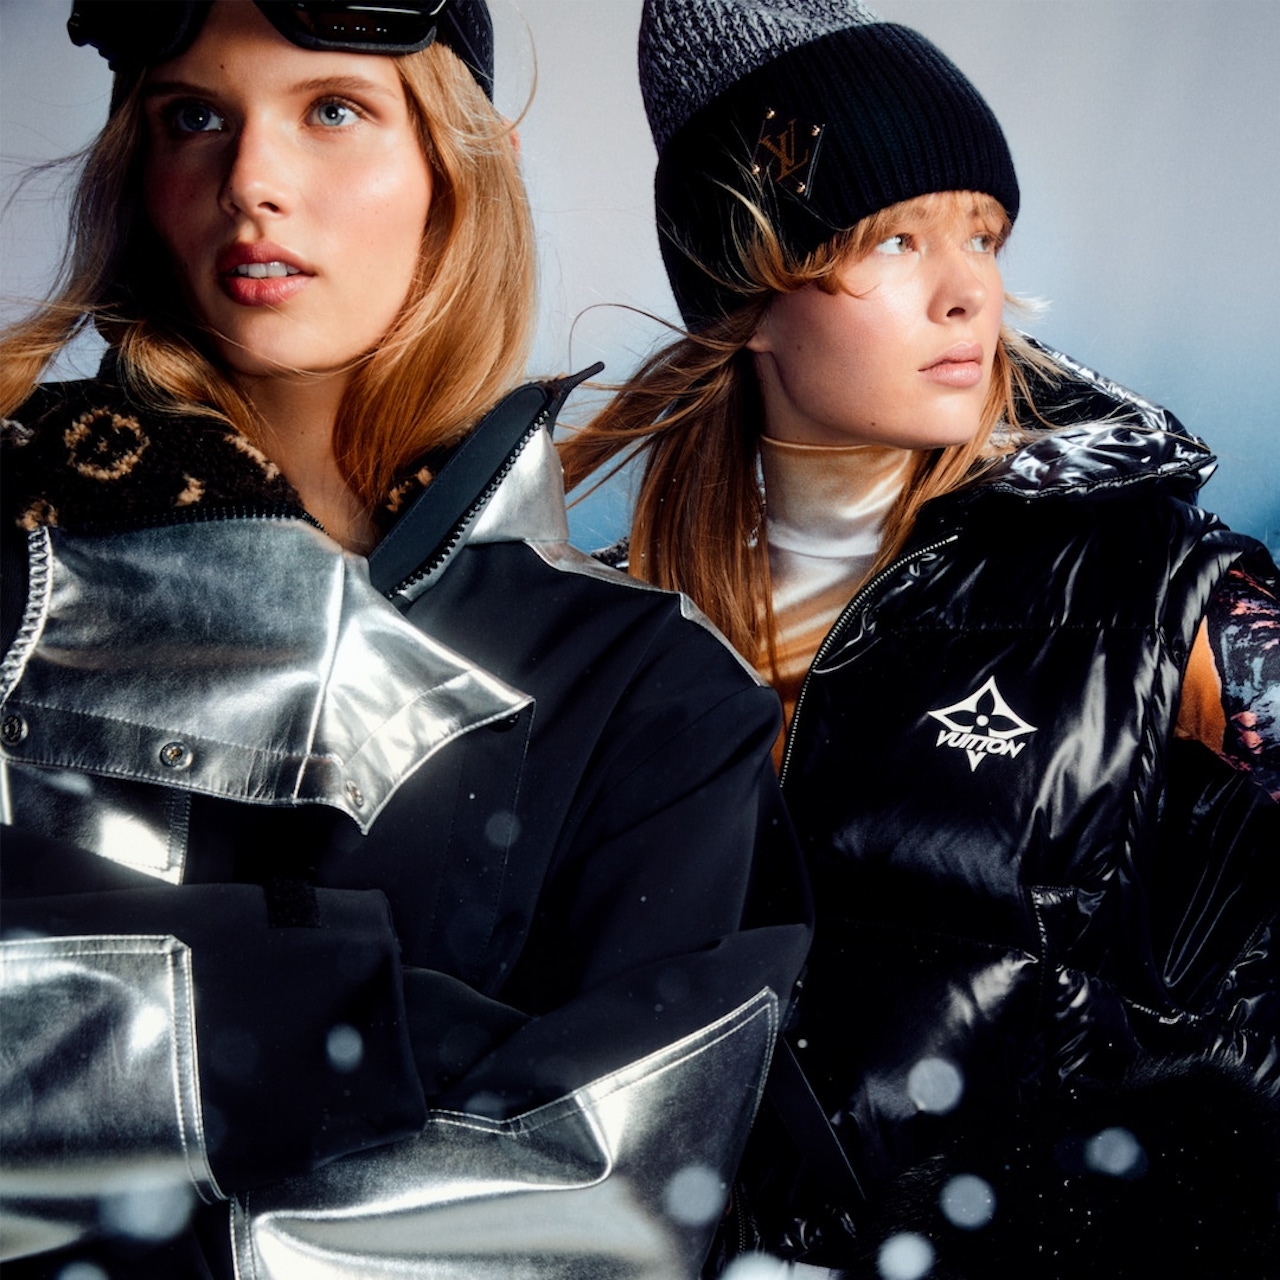 5 Must-Haves From Louis Vuitton's First LV Ski Collection